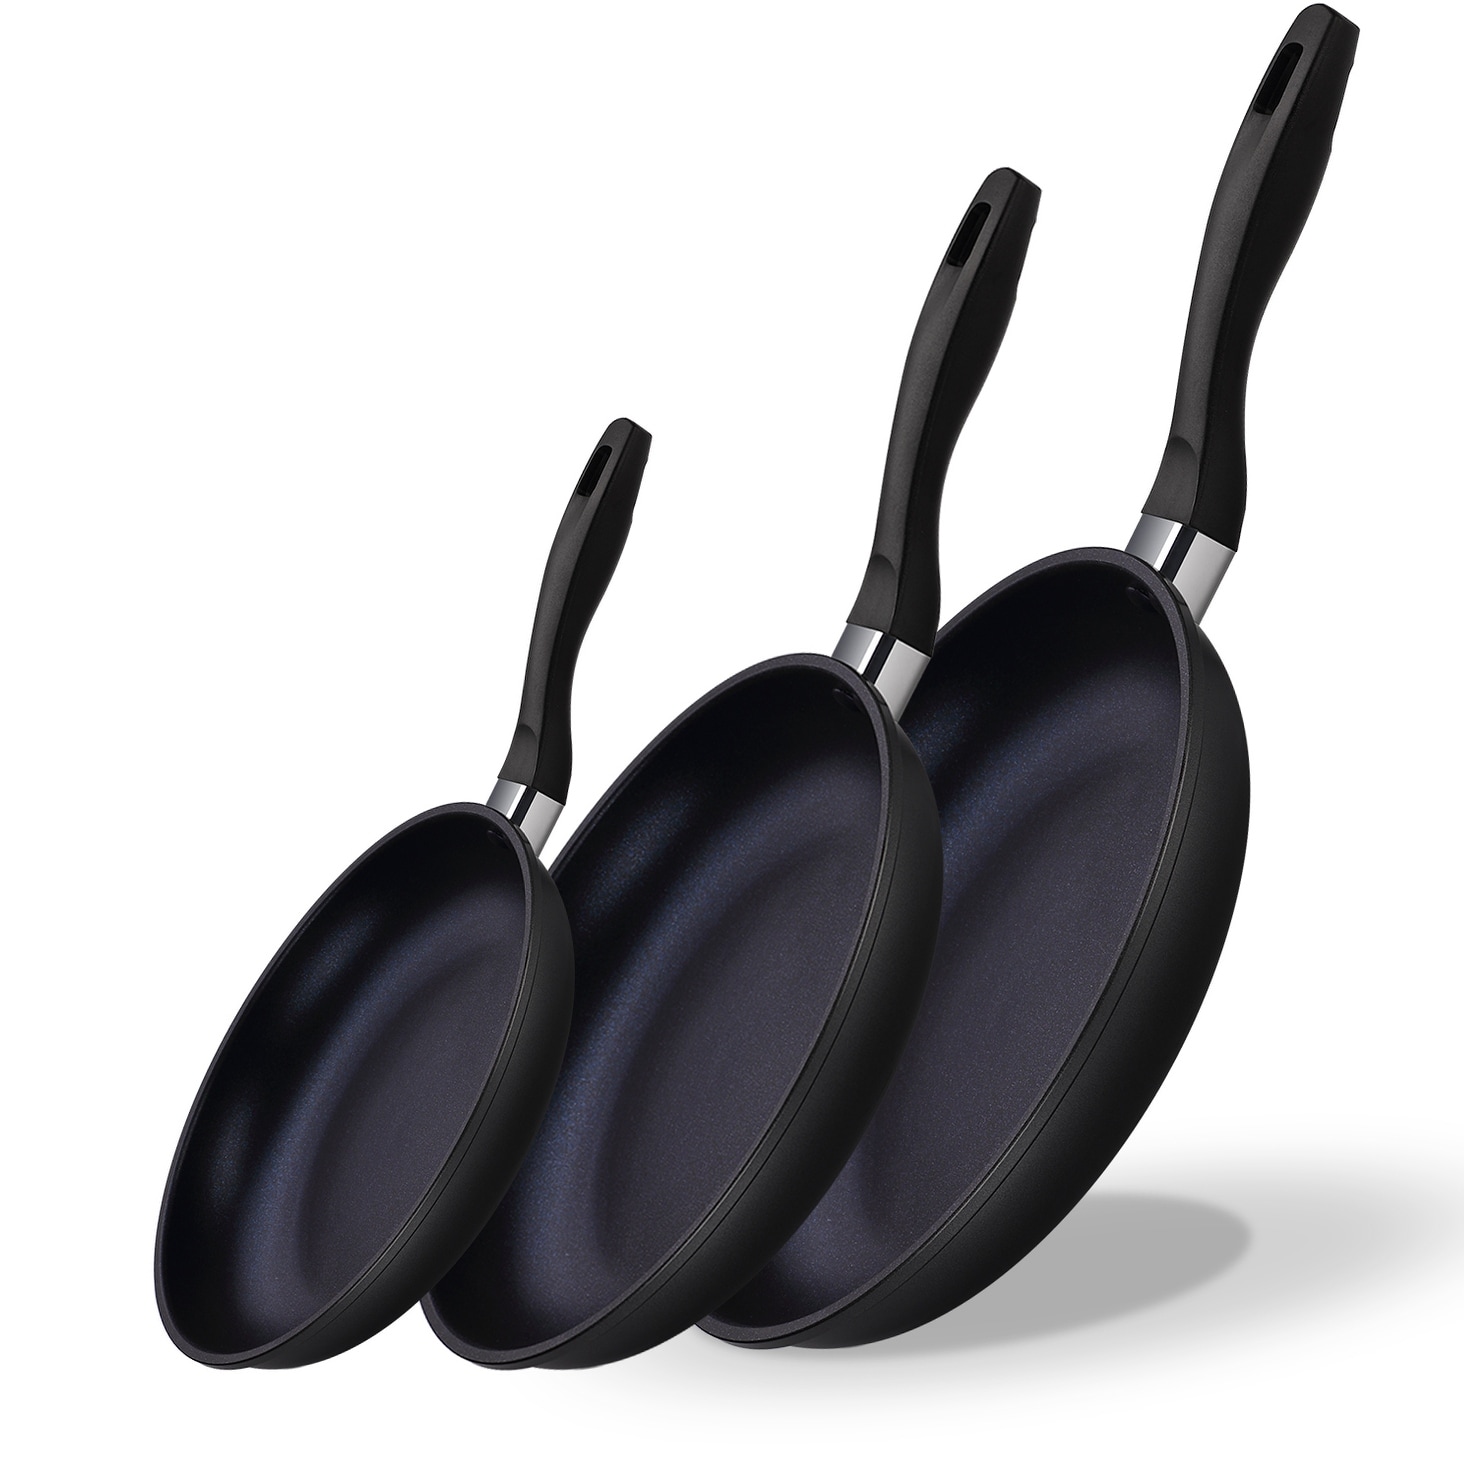 https://ak1.ostkcdn.com/images/products/is/images/direct/4cbe394c8cc4bd7d73f49585b1b9f0de93f0fcb7/Diamond-Non-Stick-Fry-Pan-3pc-Set.jpg